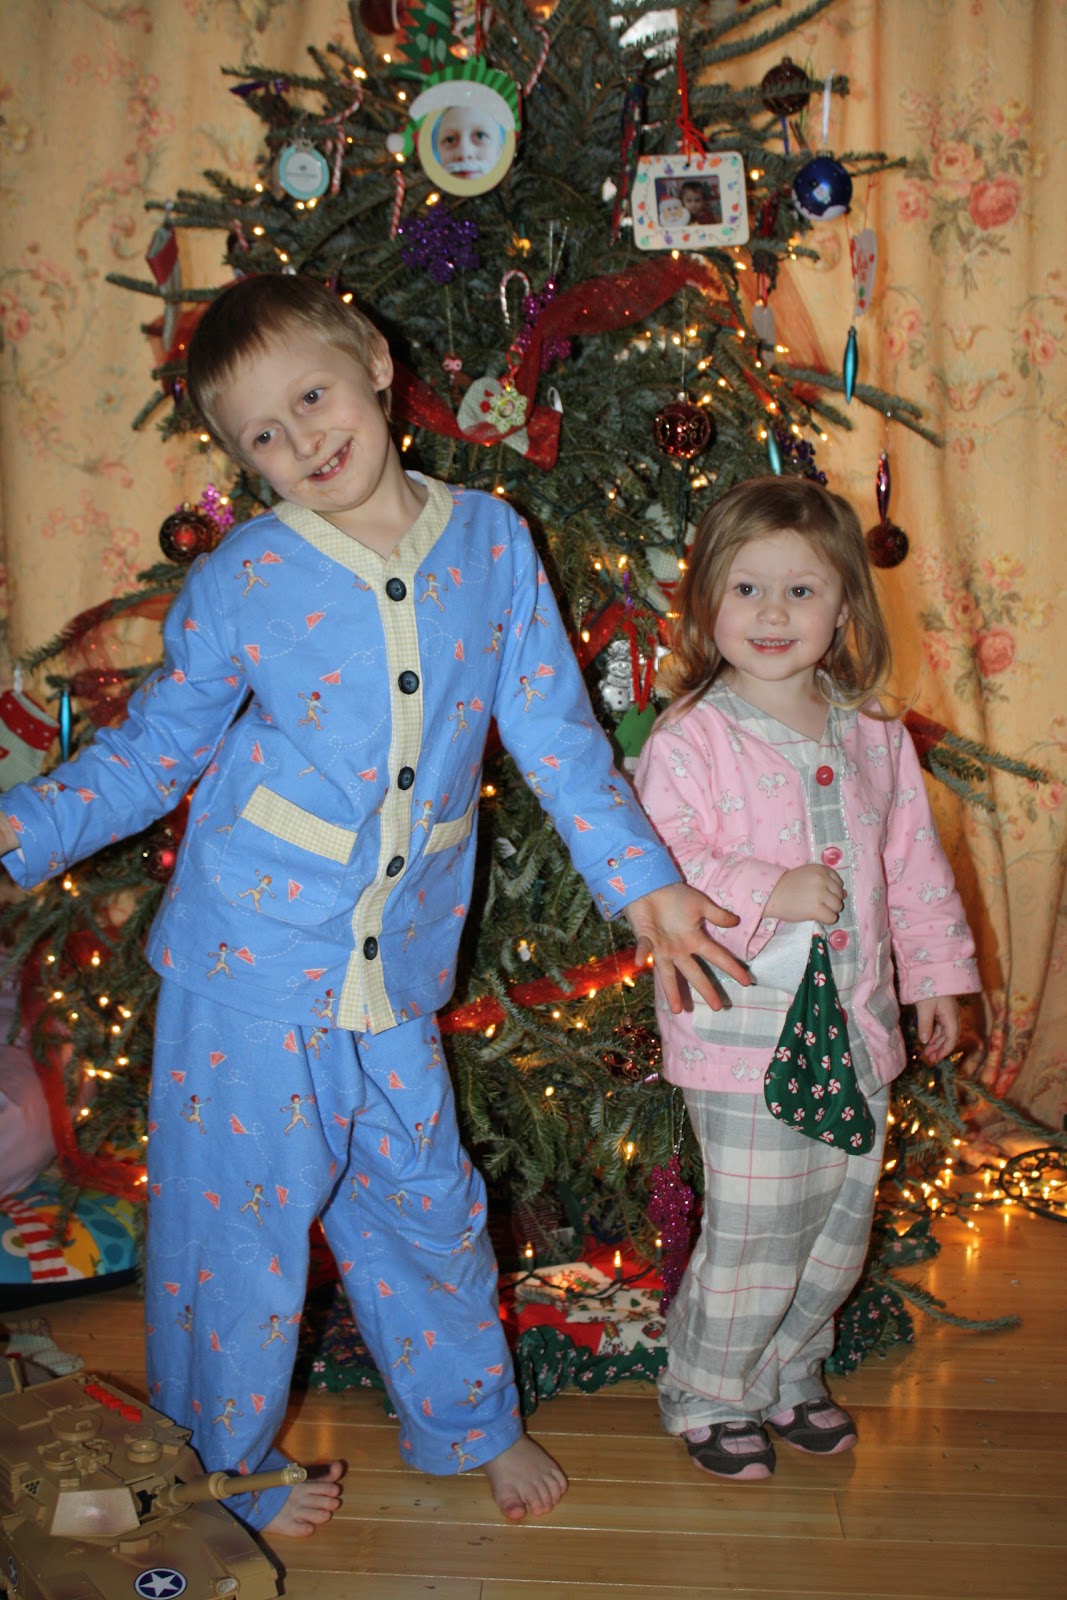 Sweet Pea and Pumkins: Sleepover PJ's for All!